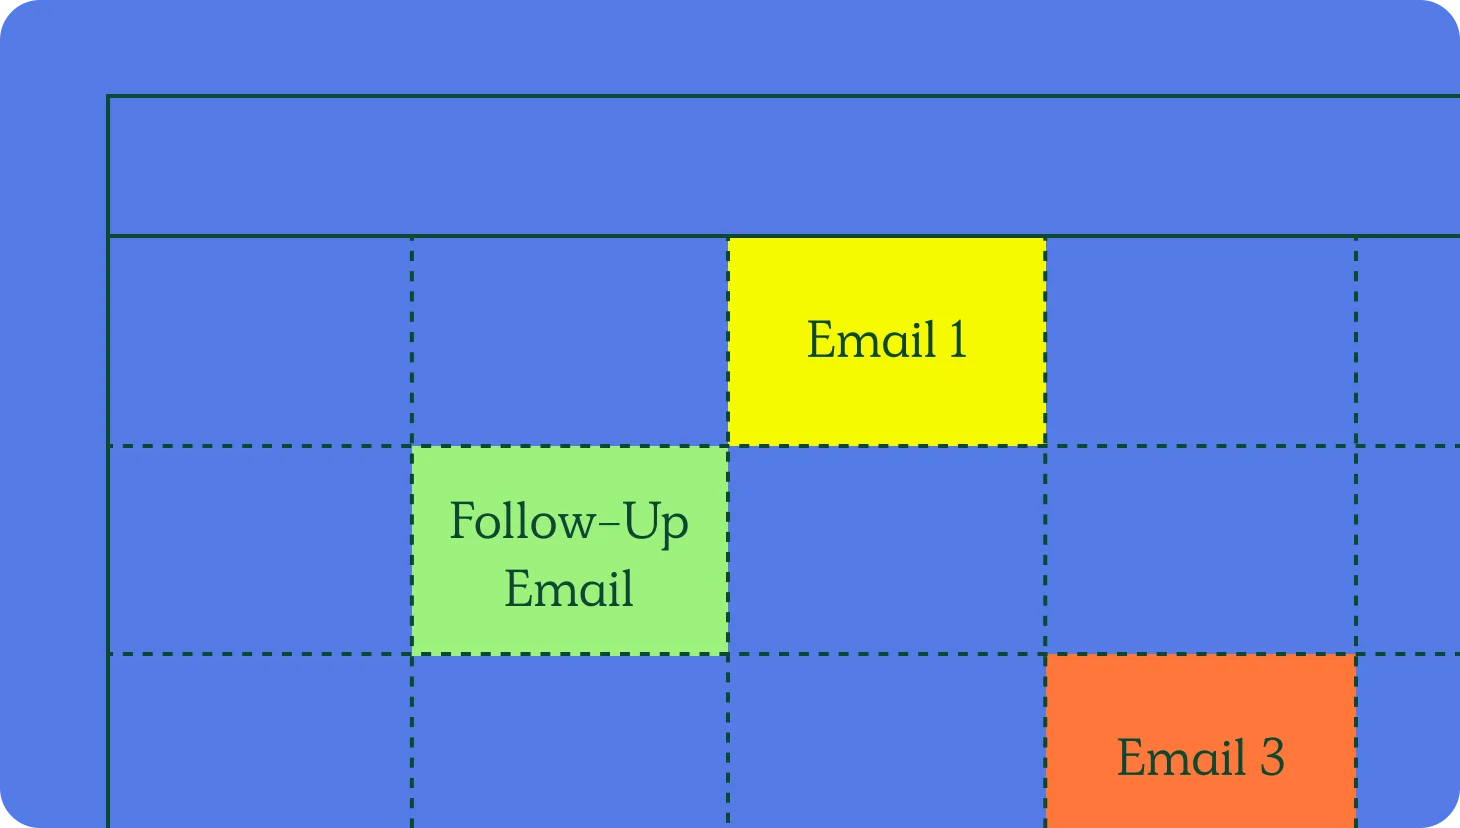 email schedule image